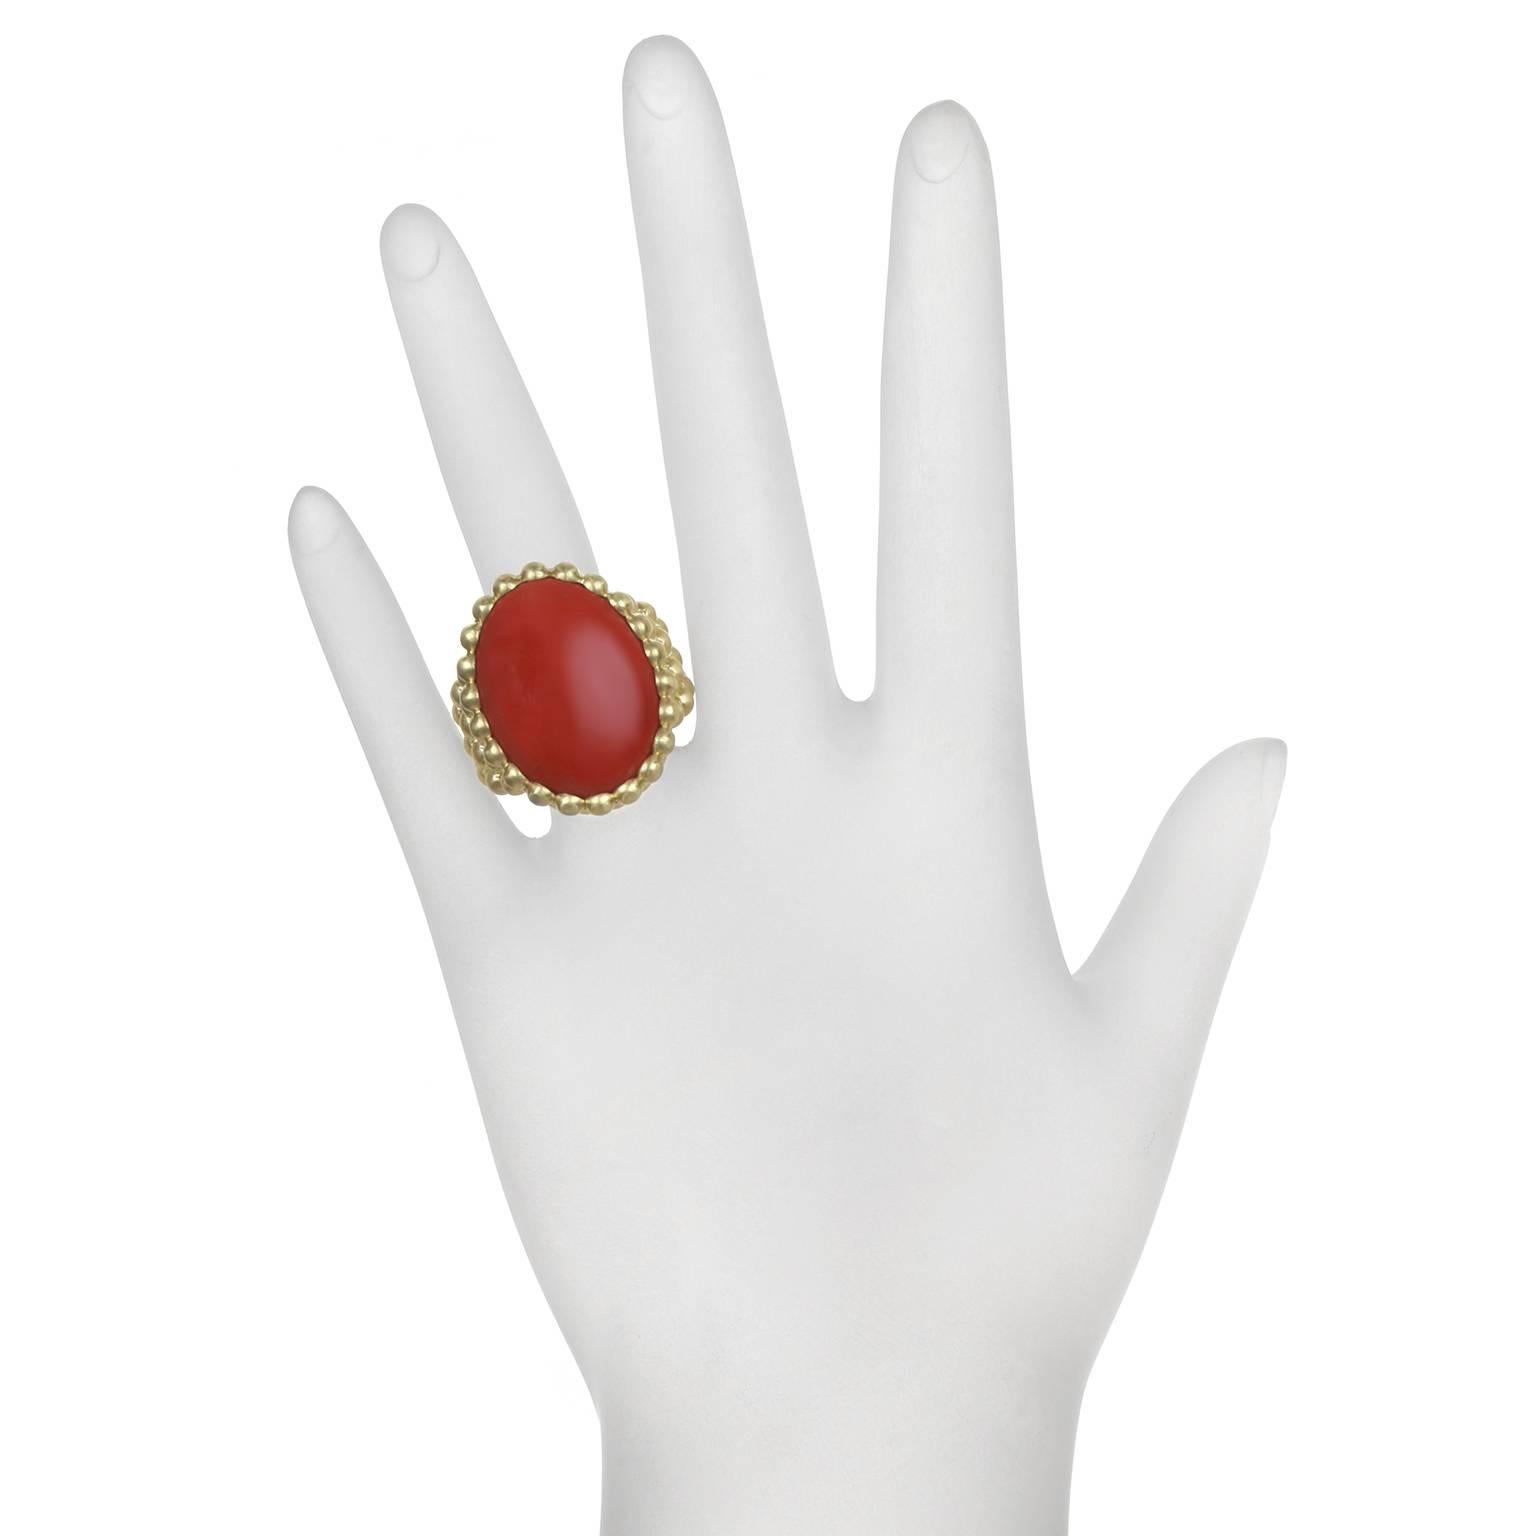 Contemporary Faye Kim 18k Gold Red Coral Cocktail Ring